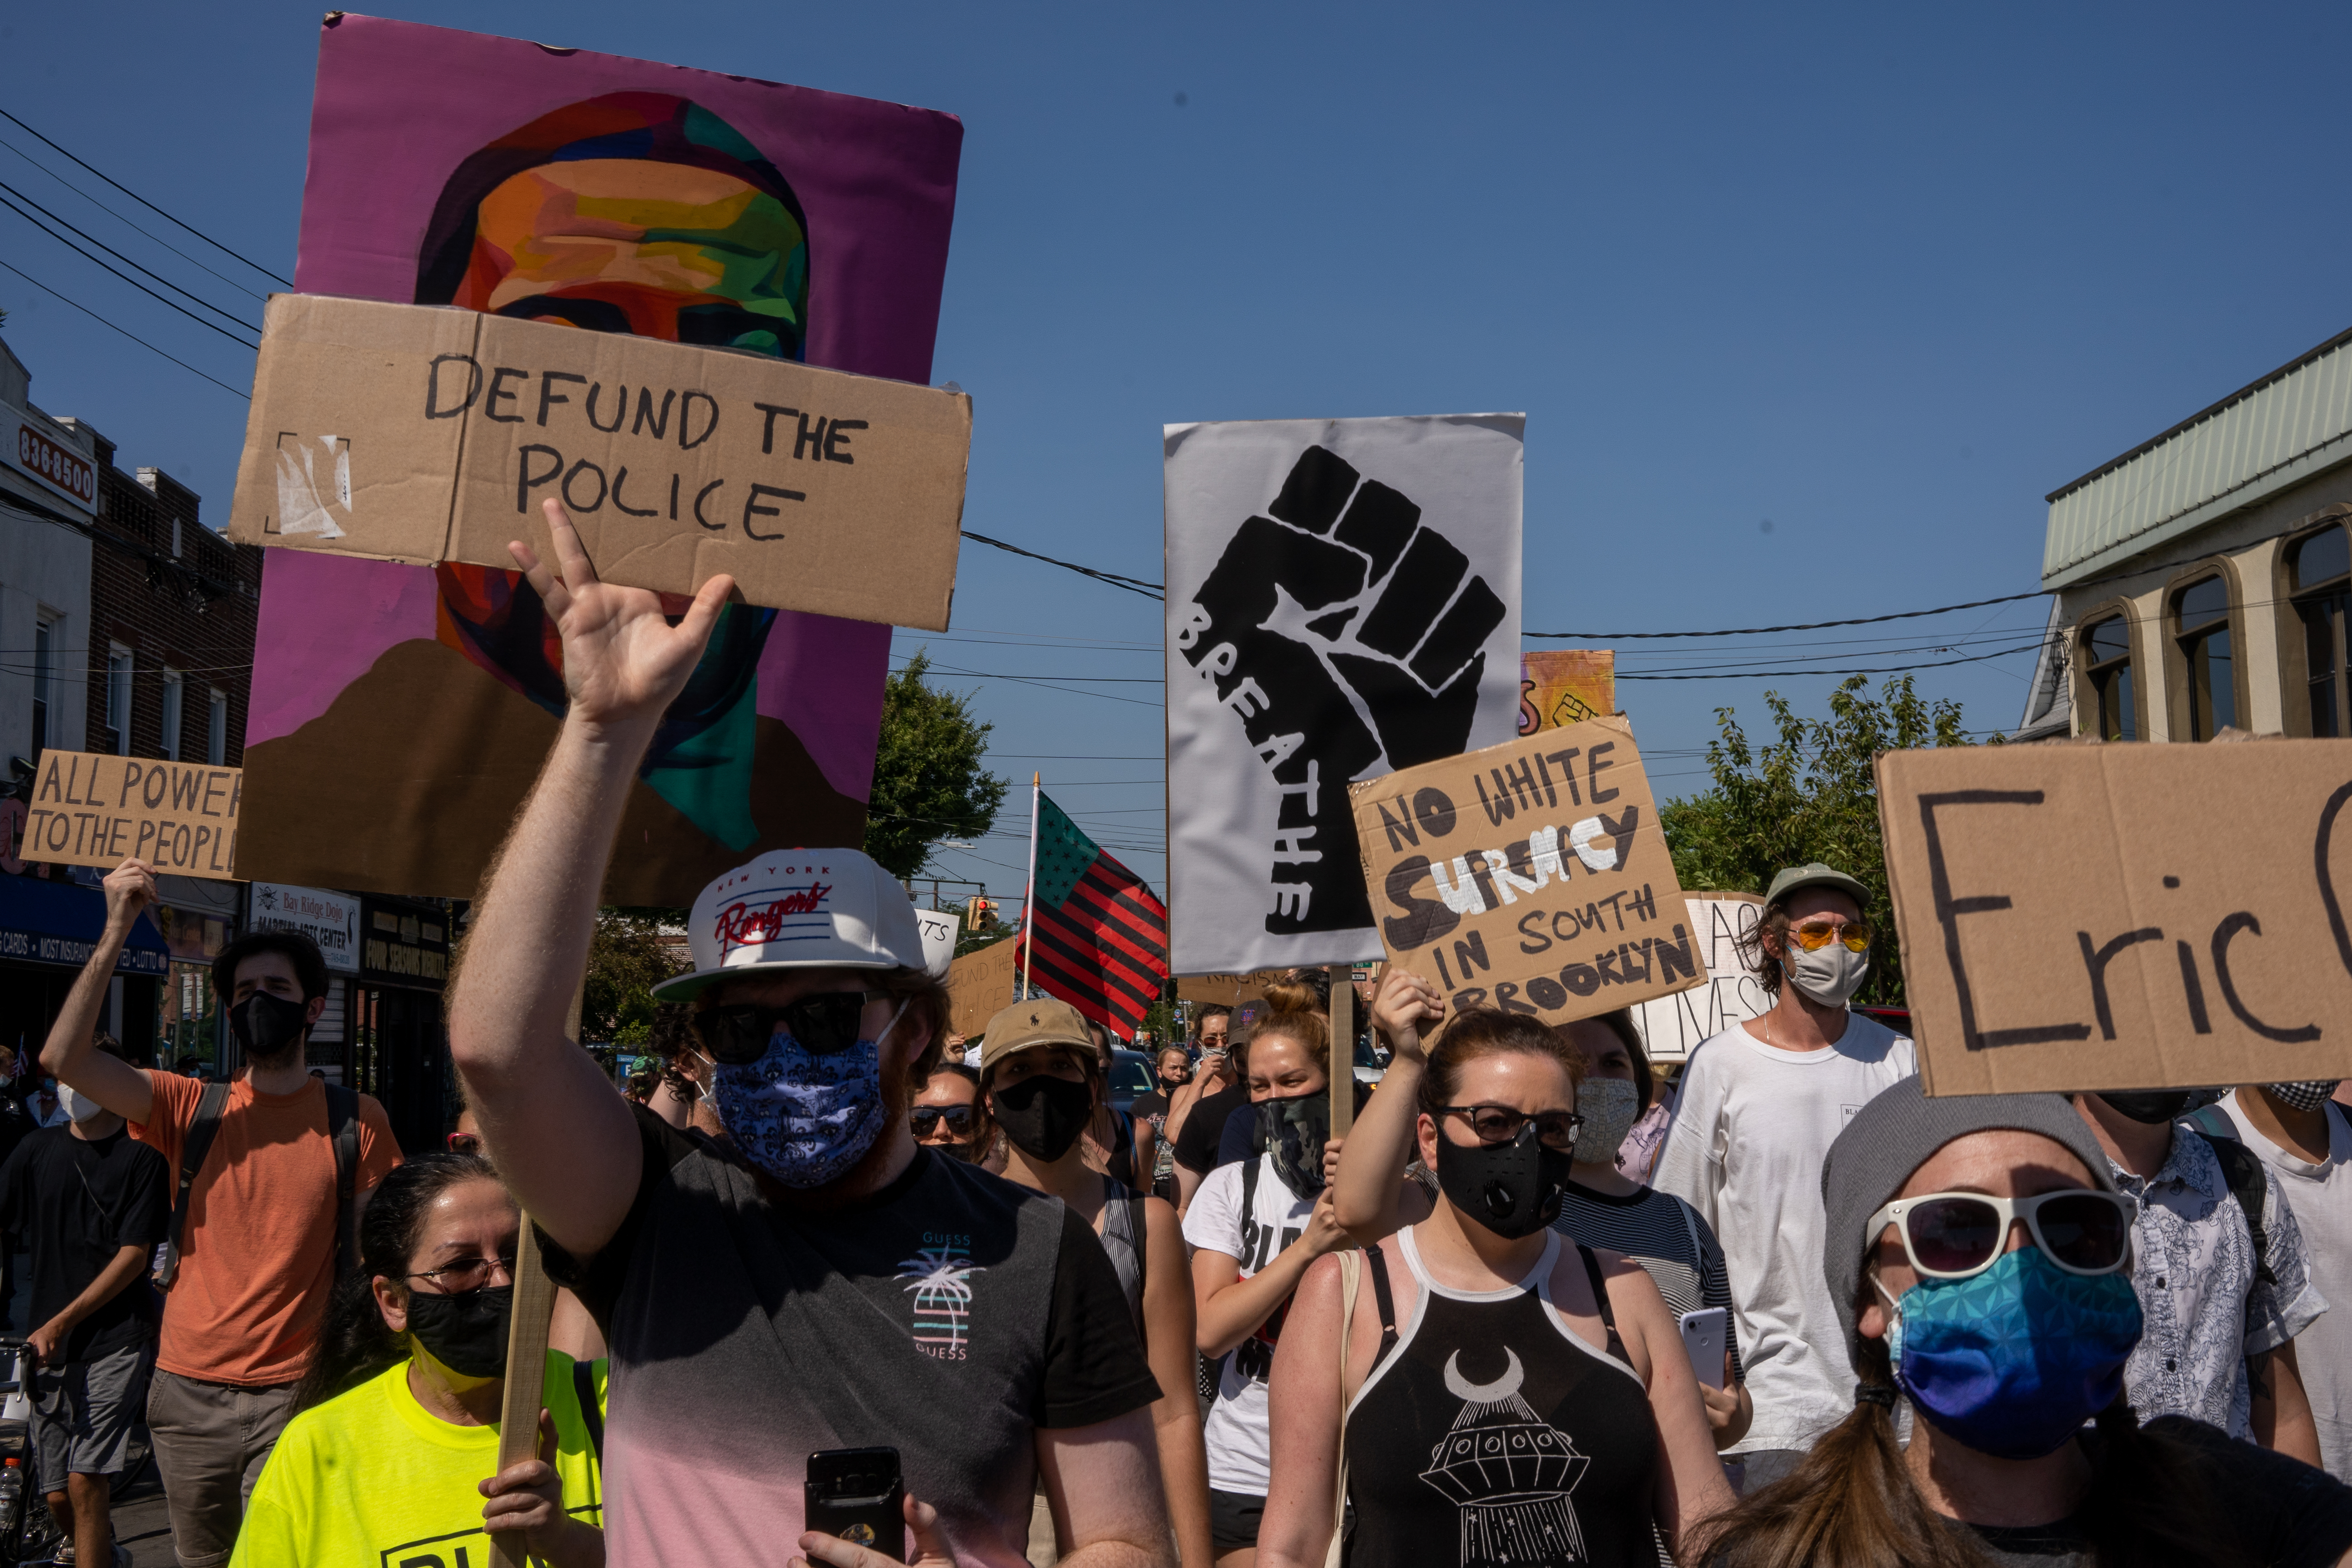 NEW YORK, NY - JULY 18: Protesters gather in Dyker Heights to demand police reform on July 18, 2020 in the Brooklyn borough of New York City. Dyker Heights was the site of a pro-police rally a week ago that led to confrontations and arrests. (Photo by David Dee Delgado/Getty Images)